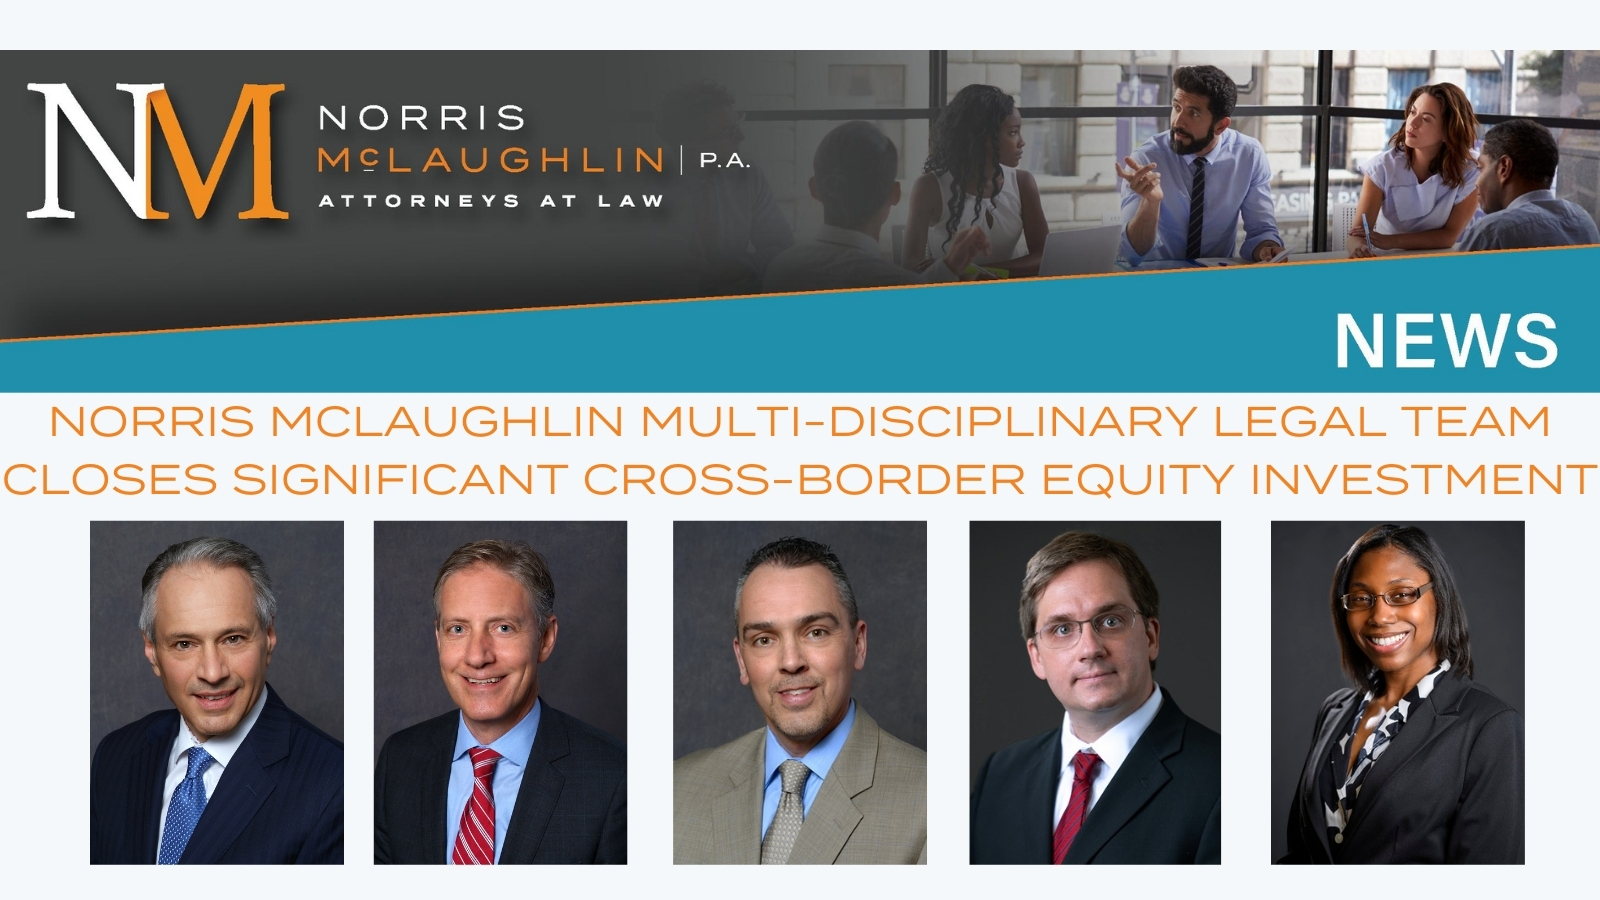 Norris McLaughlin Multi-Disciplinary Legal Team Closes Significant Cross-Border Equity Investment